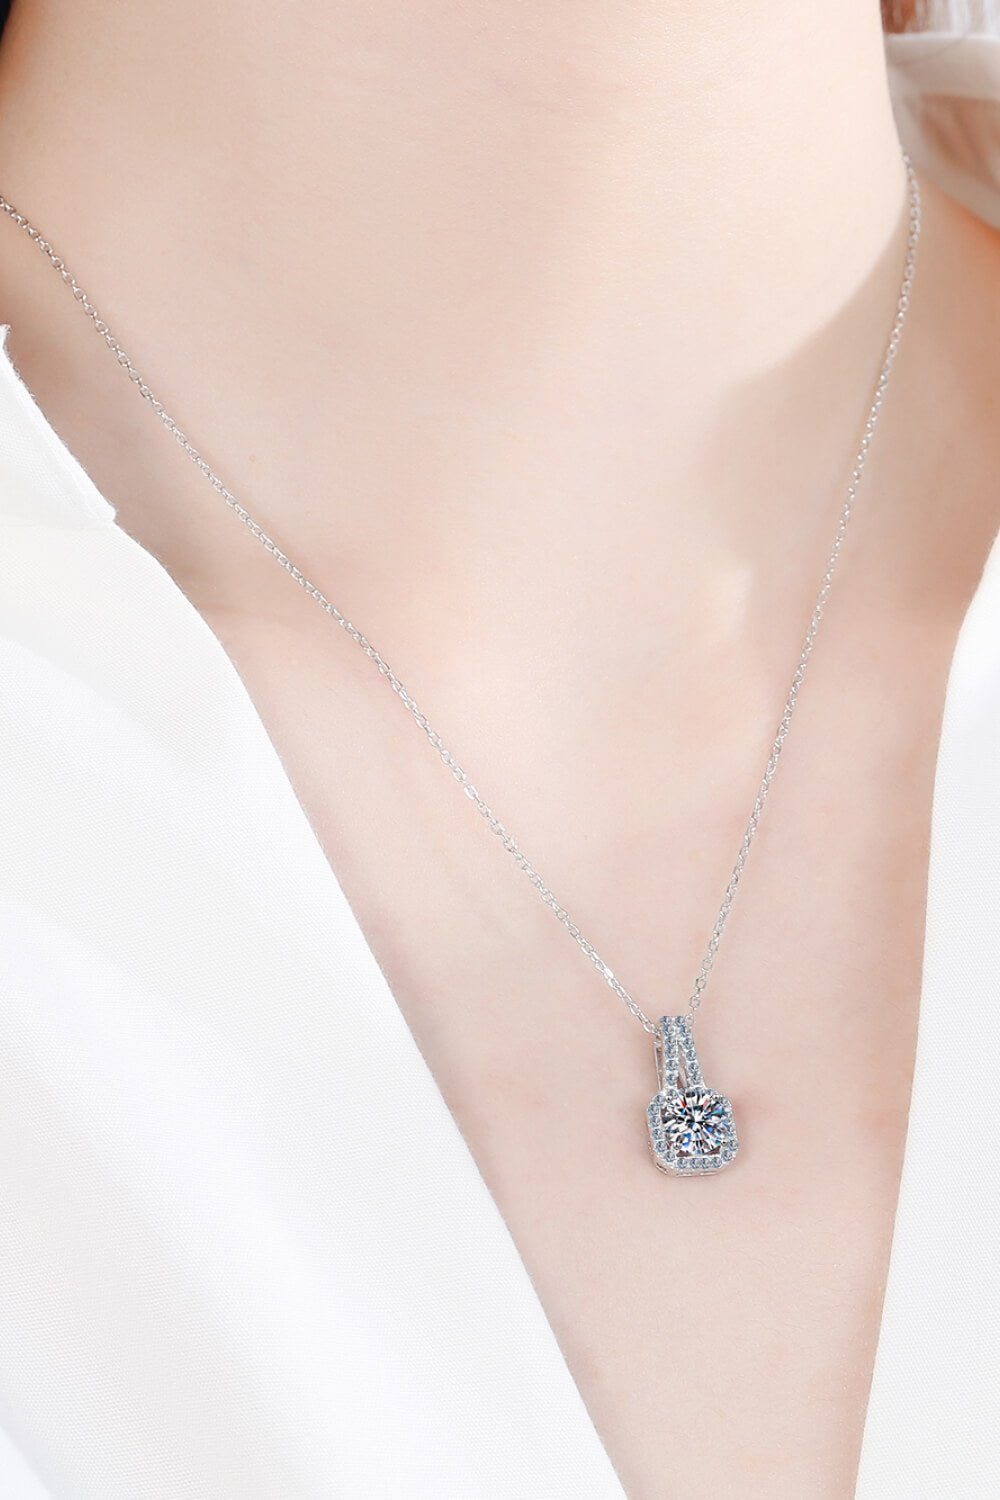 "Look Amazing 2 Carat Moissanite Pendant Necklace - A Sparkling Reminder of Your Love - Enhance Her Natural Beauty" - Guy Christopher